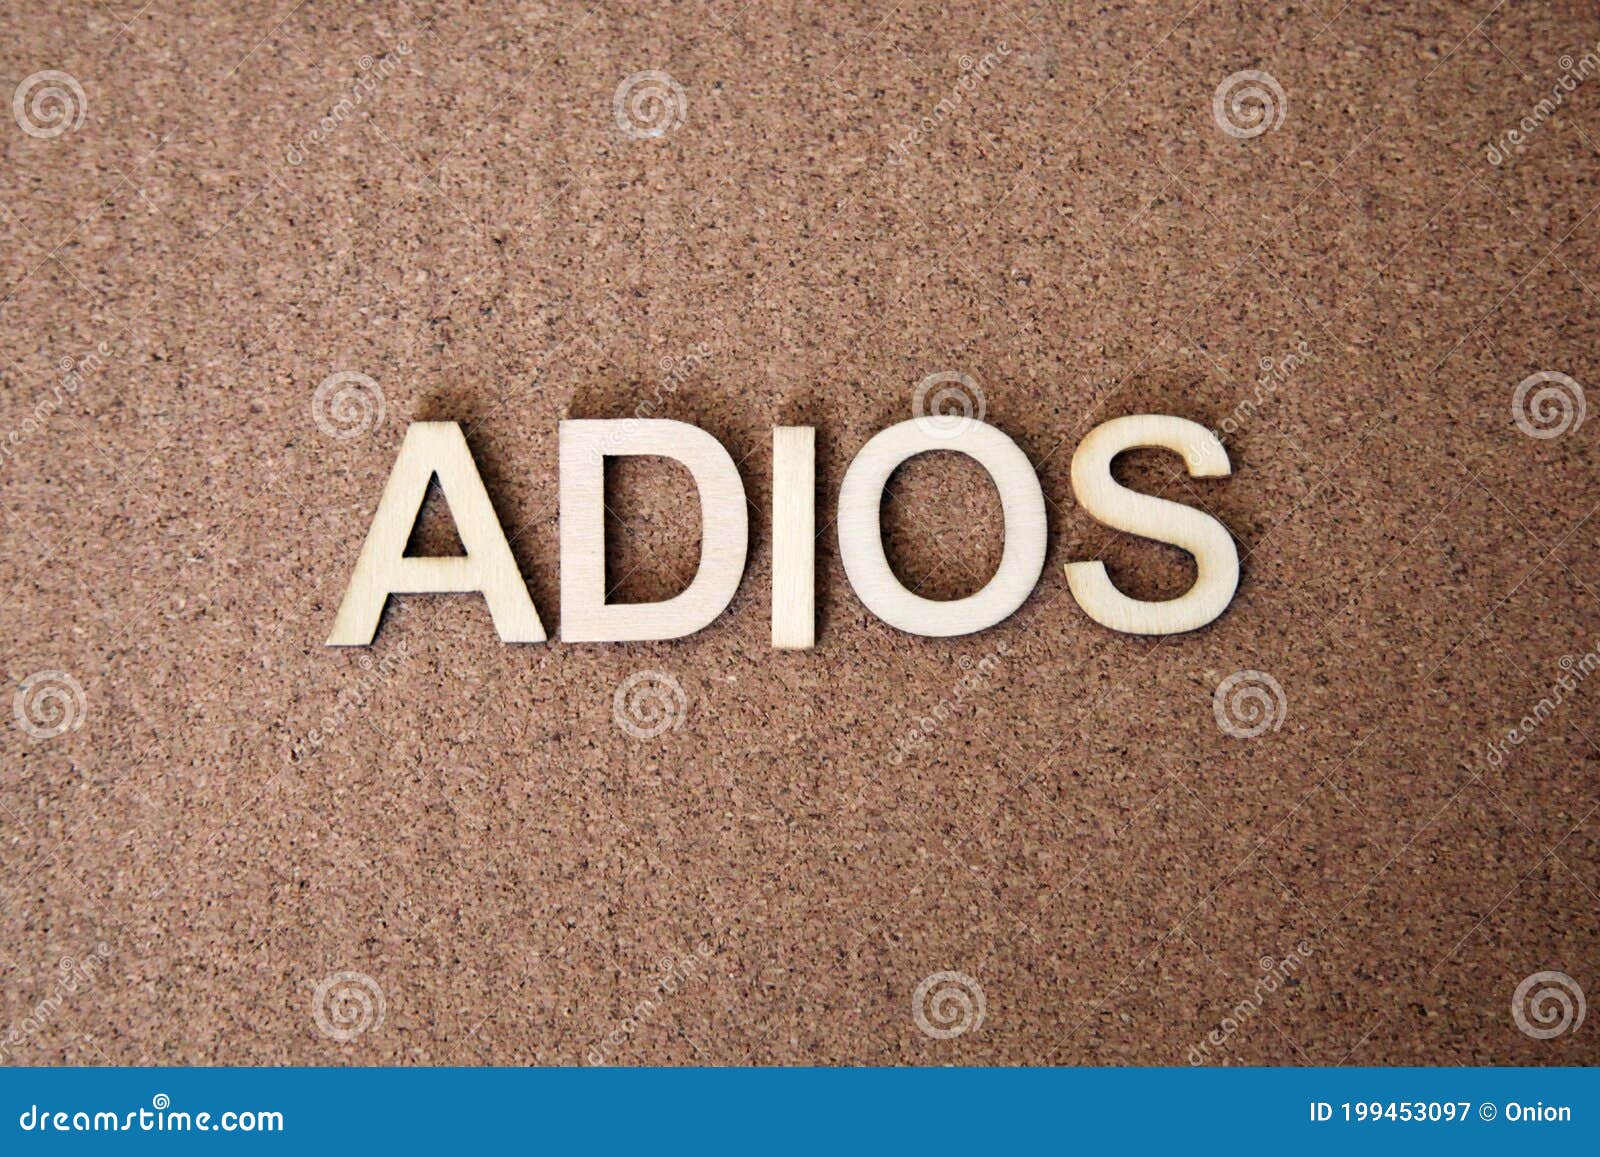 wooden letters forming the words adios in spanish